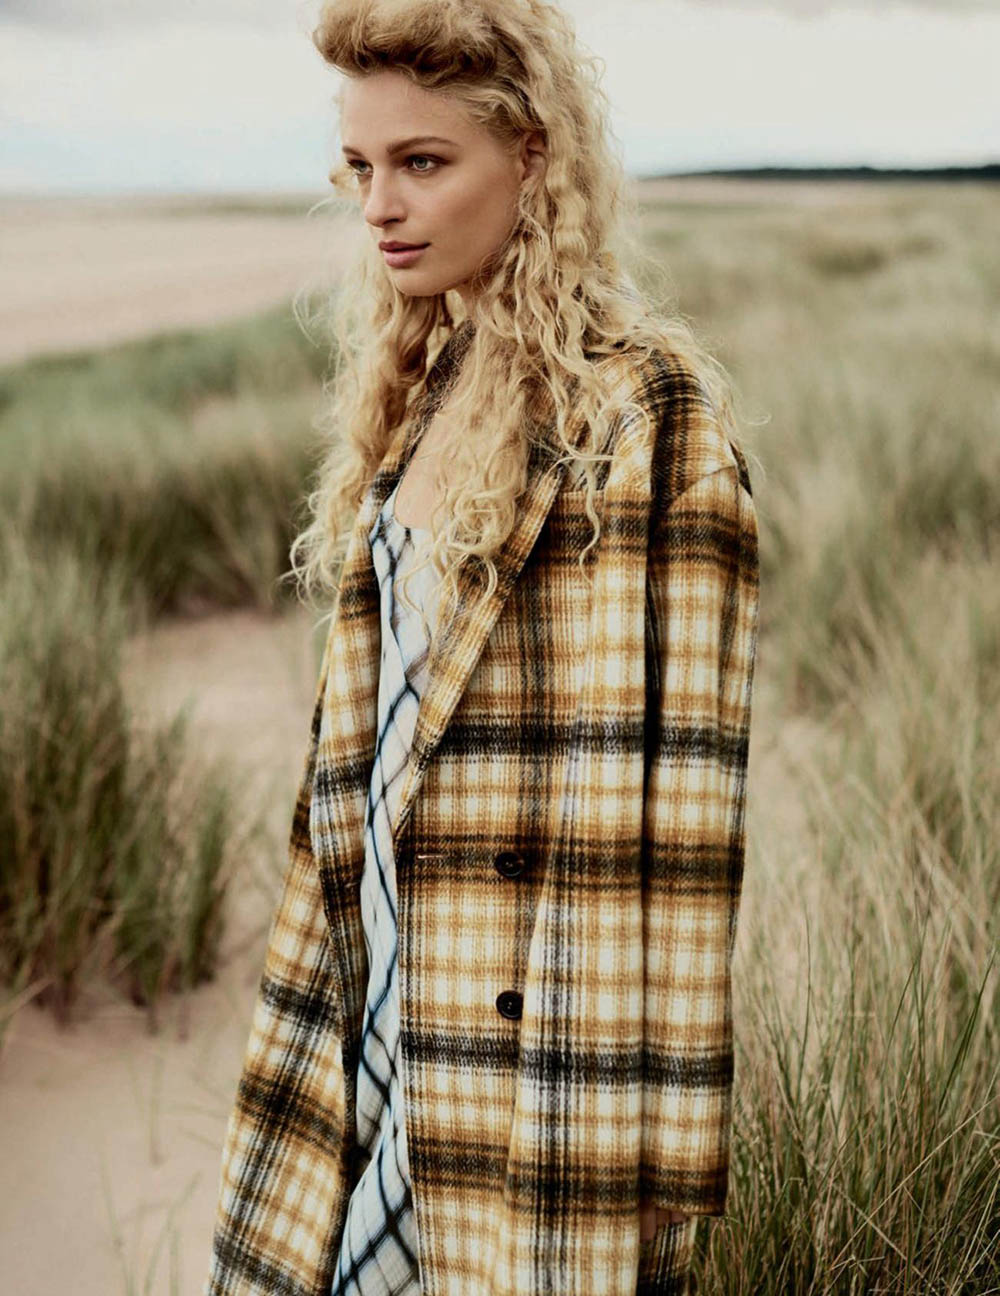 Frederikke Sofie by Boo George for Vogue Spain September 2019